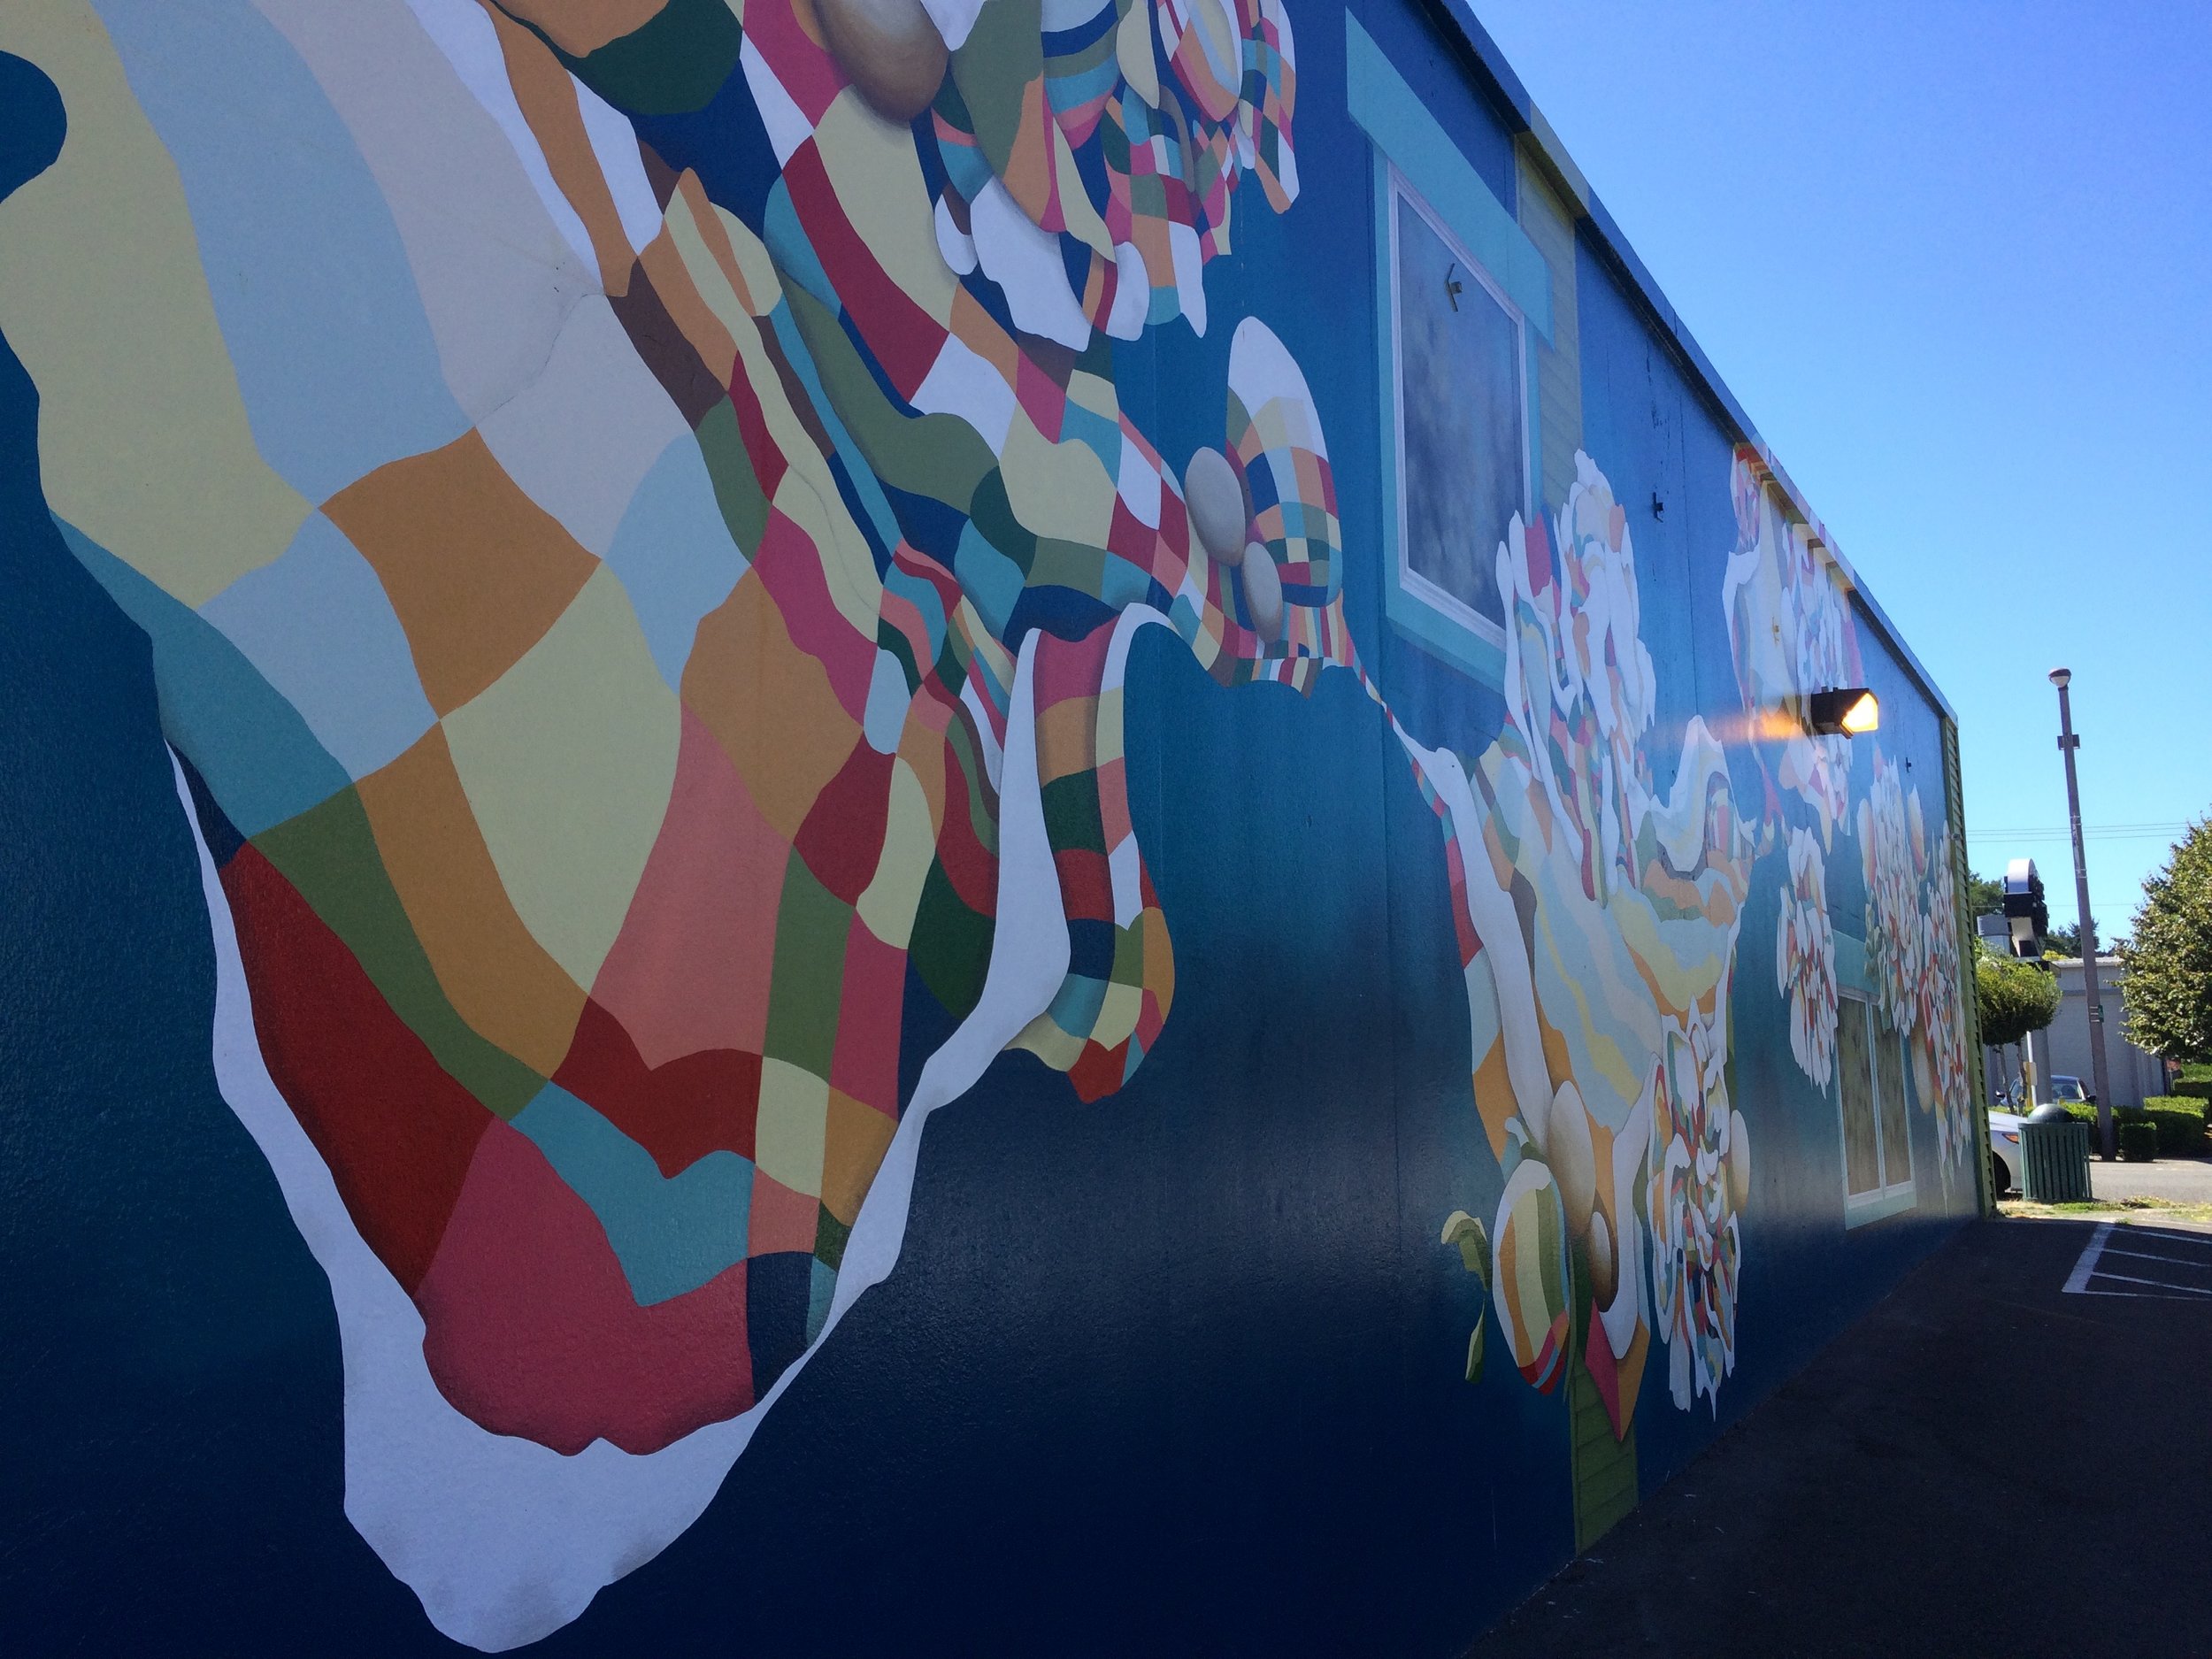 2016 Tacoma Murals Project by Mindy Barker &amp; Jesse Peterson at 14th &amp; MLK